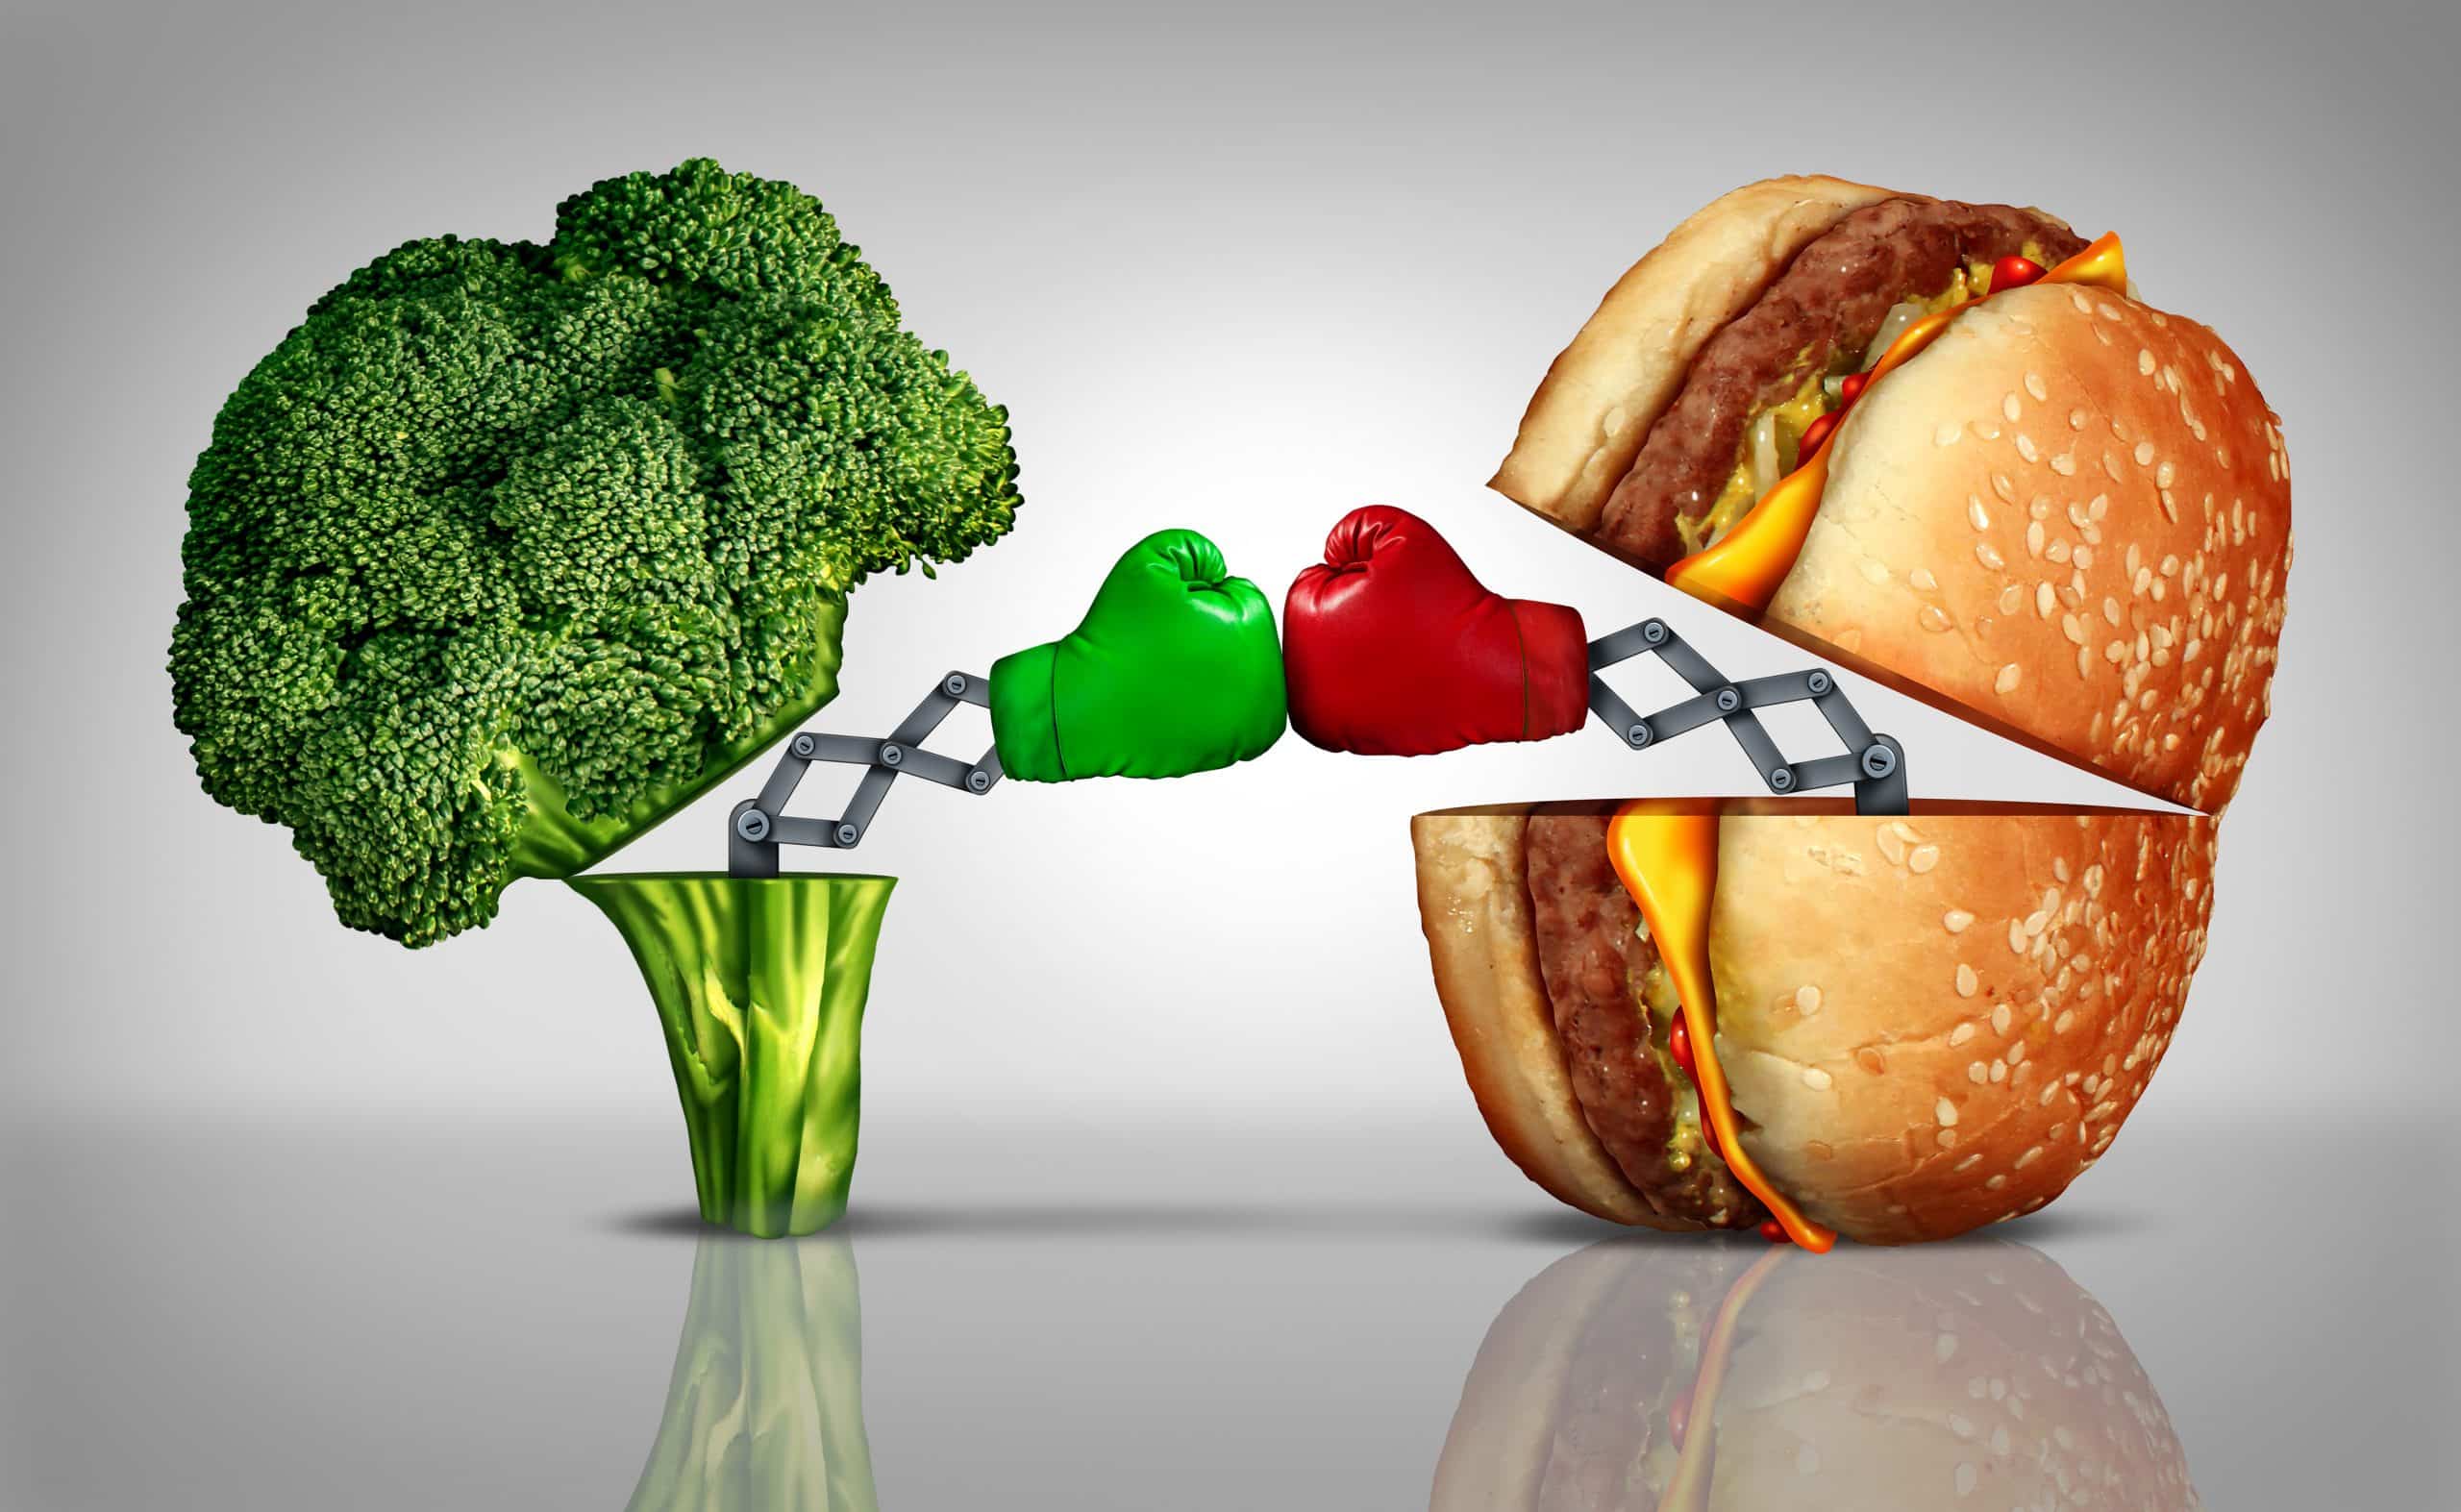 Broccoli and a cheeseburger boxing each other